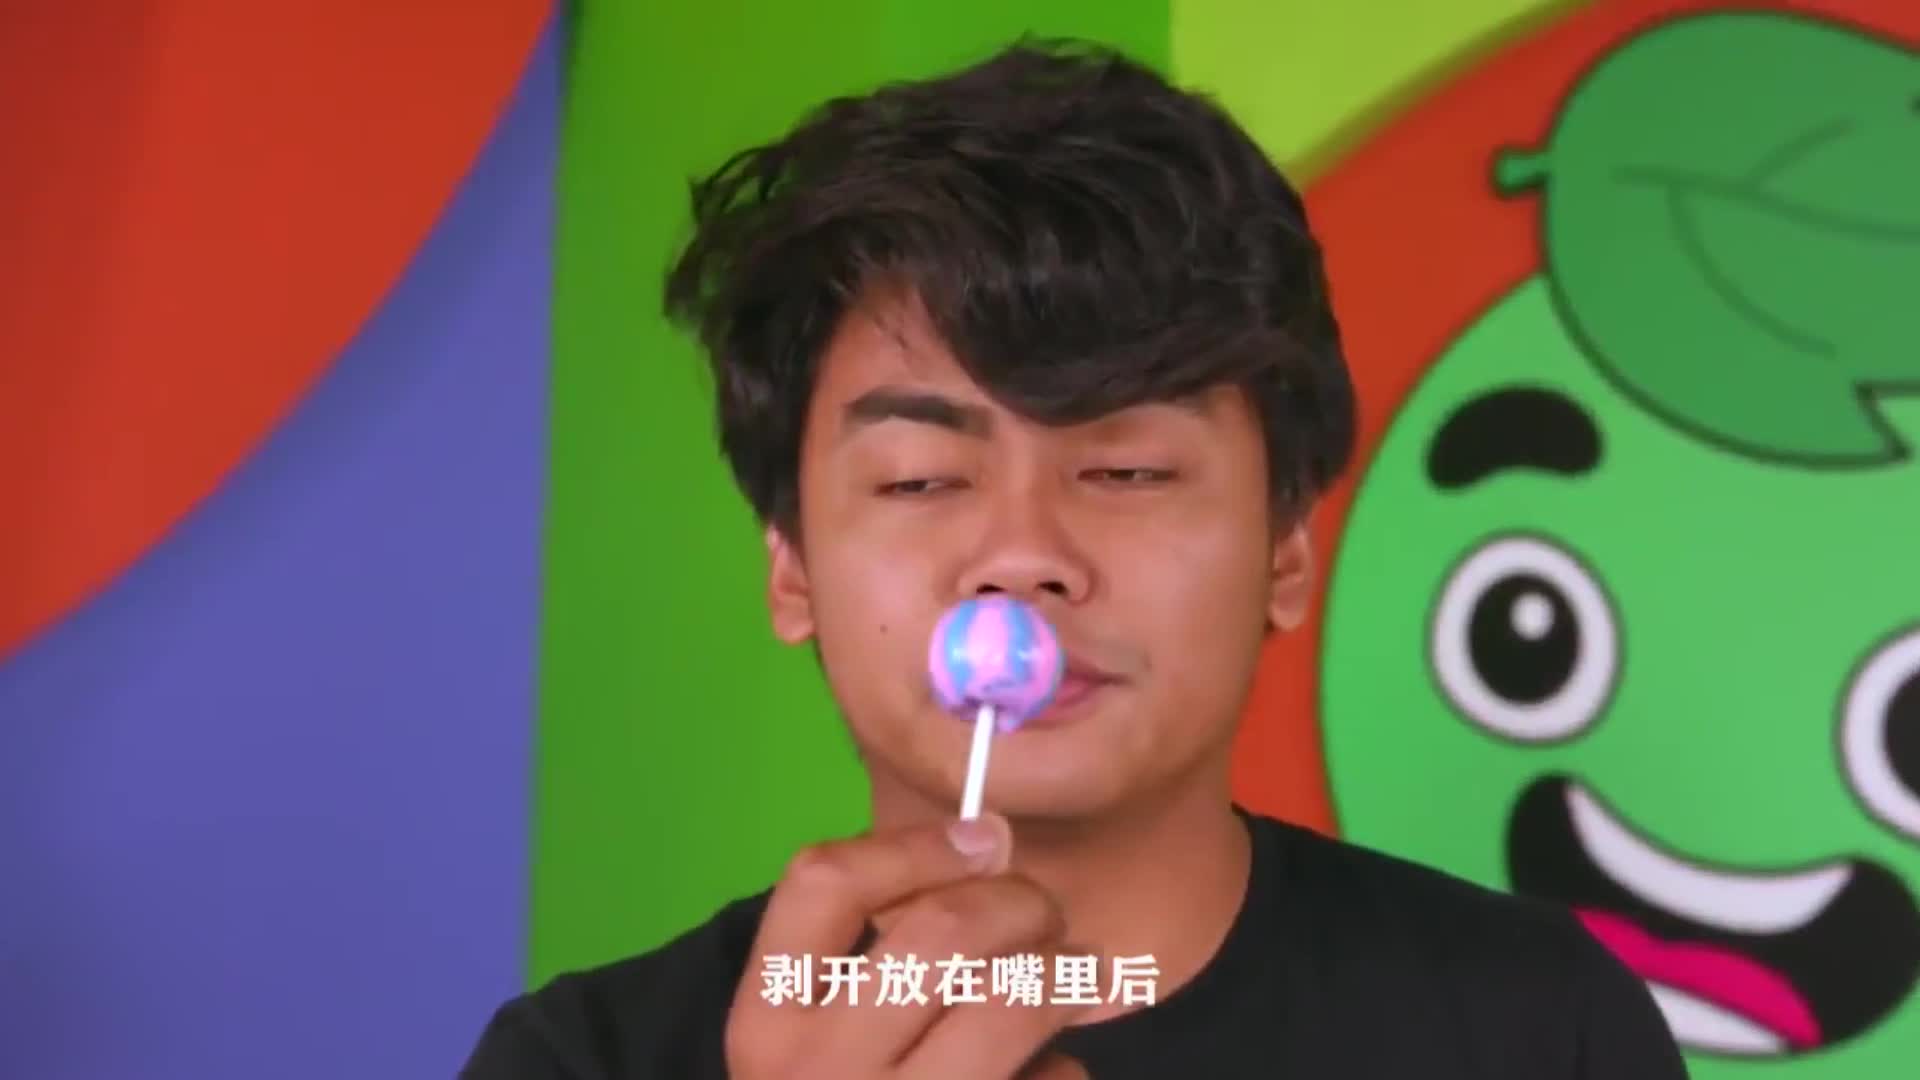 The hottest lollipop in foreign countries, the little brother of the playwright tucked it in his mouth for 5 minutes. The picture was so funny.